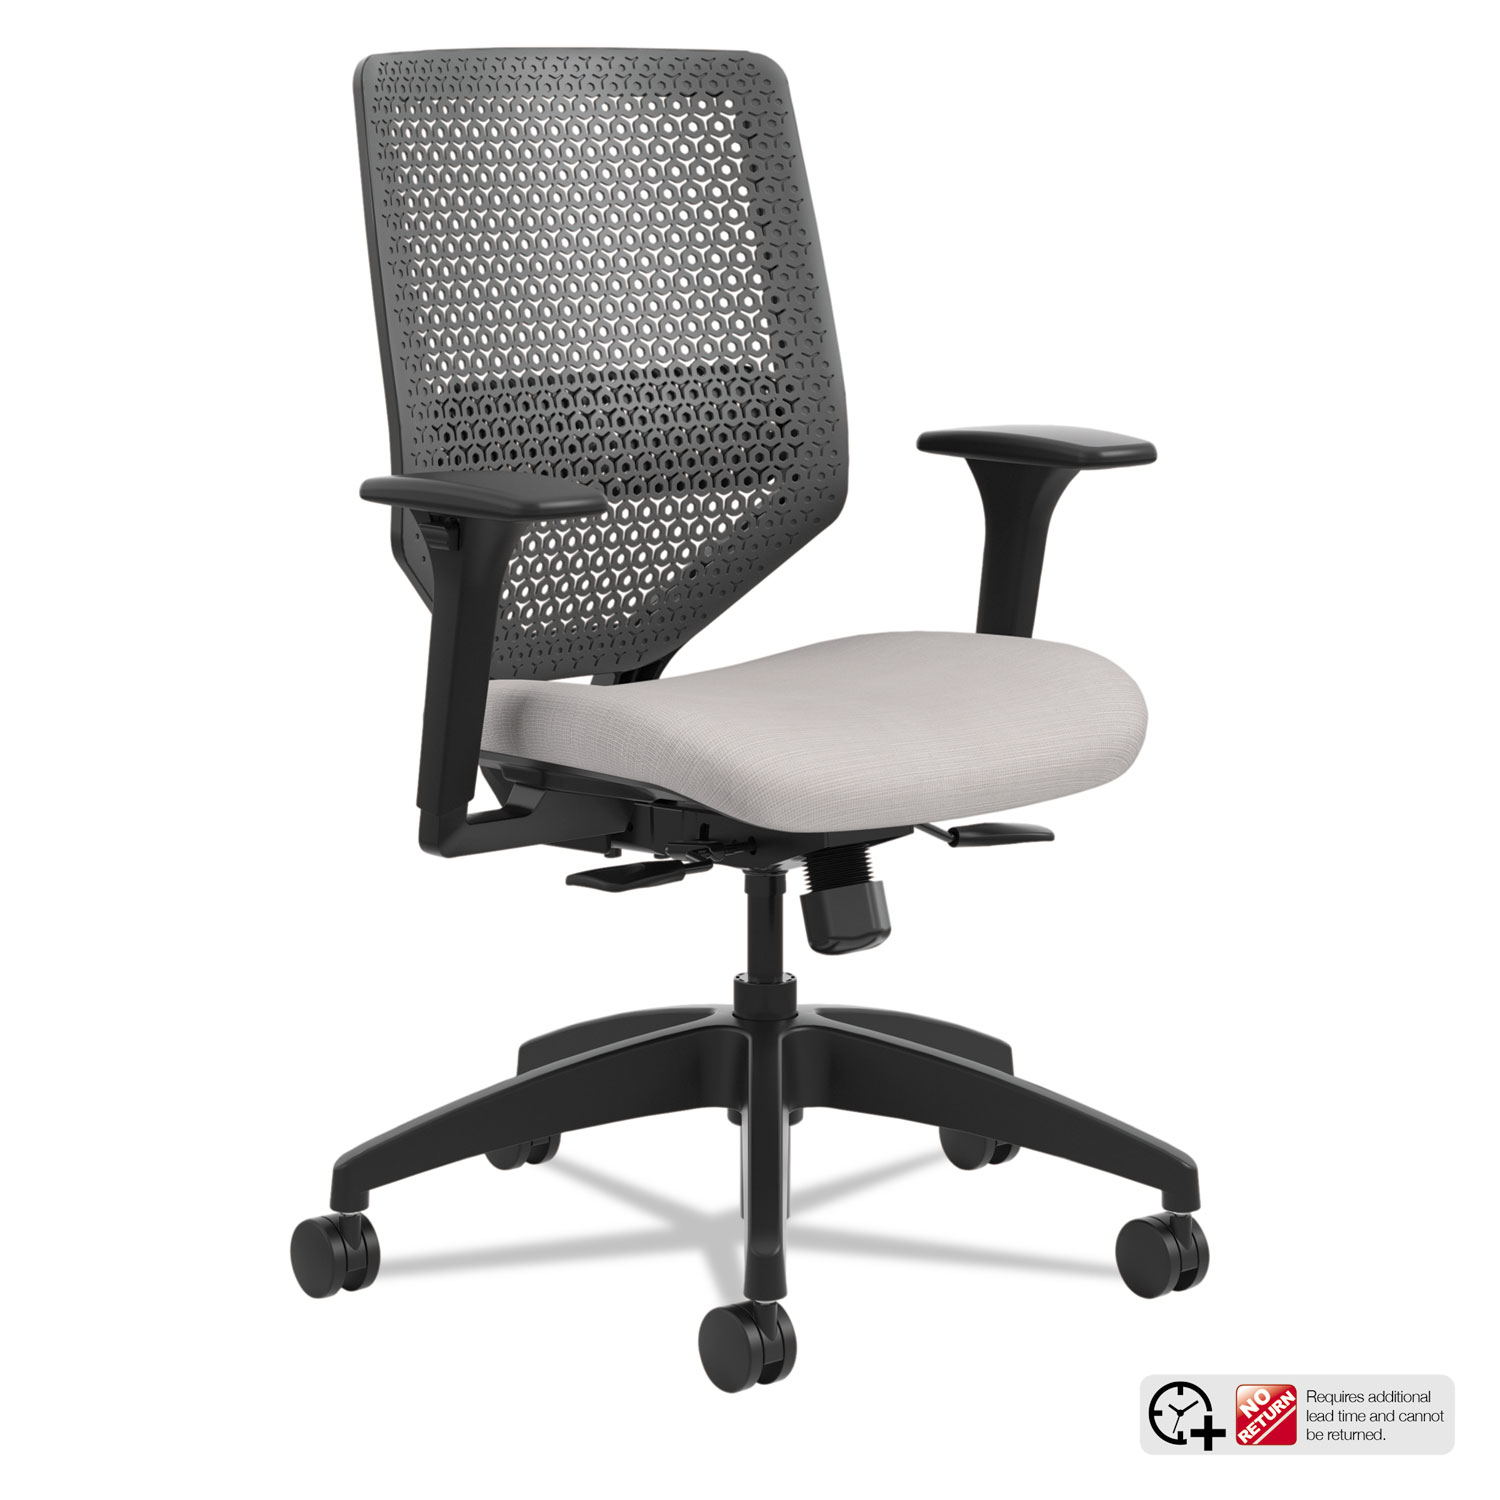  HON SVRIACLC19TK Solve Series ReActiv Back Task Chair, Supports up to 300 lbs., Sterling Seat/Charcoal Back, Black Base (HONSVR1ACLC19TK) 